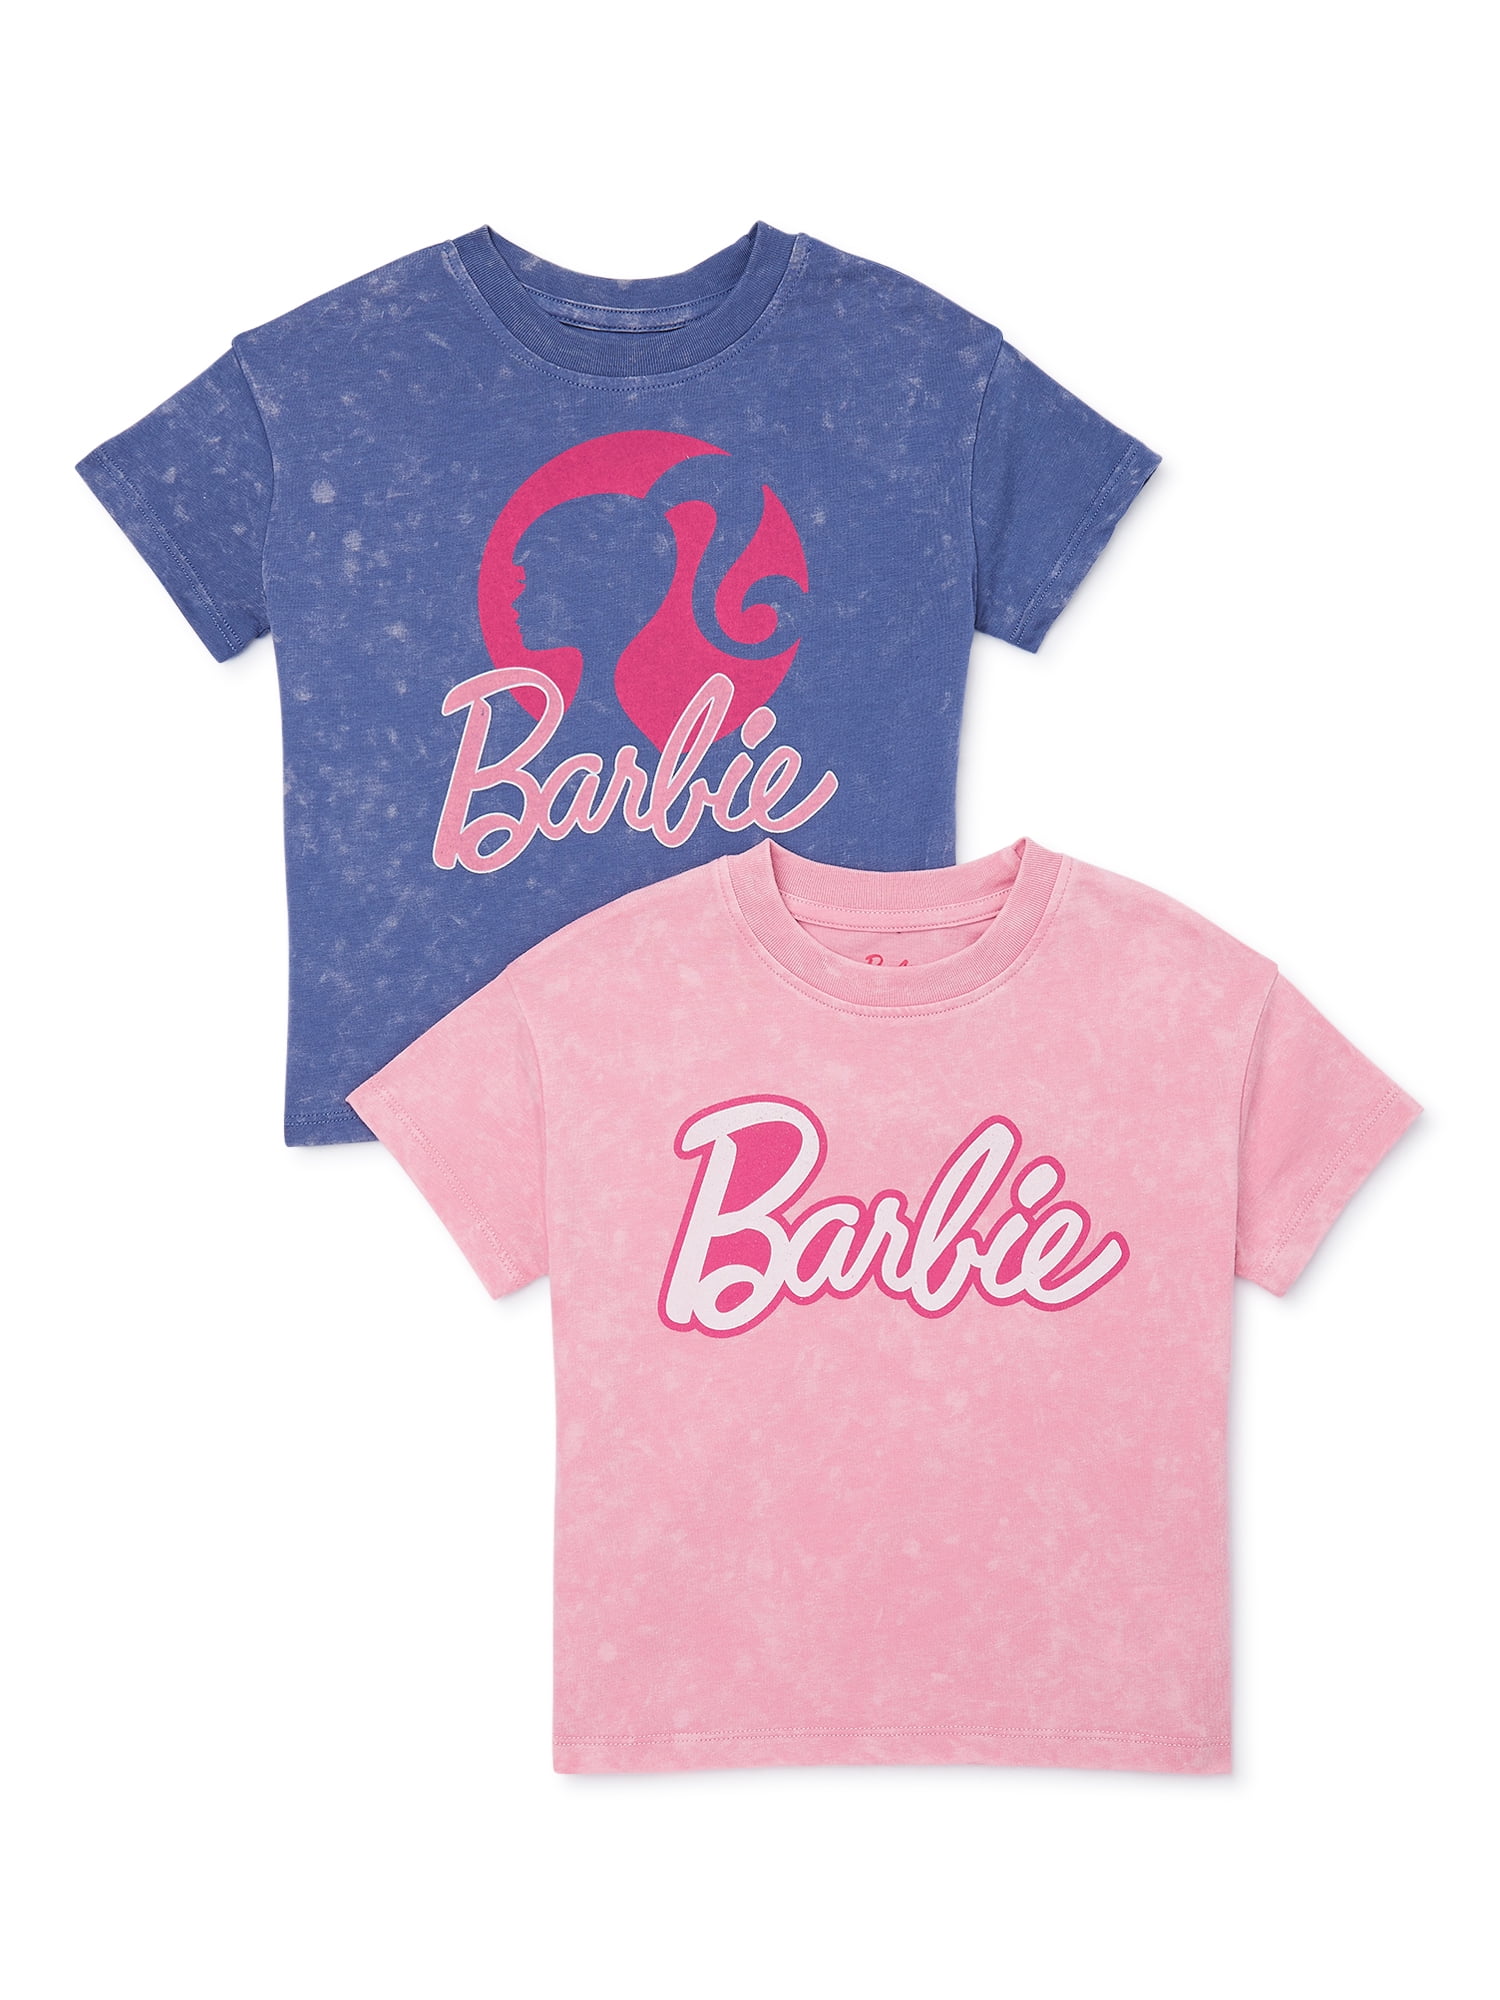 Barbie Baby and Toddler Girls Graphic Tee, 2-Pack, Sizes 12M-5T